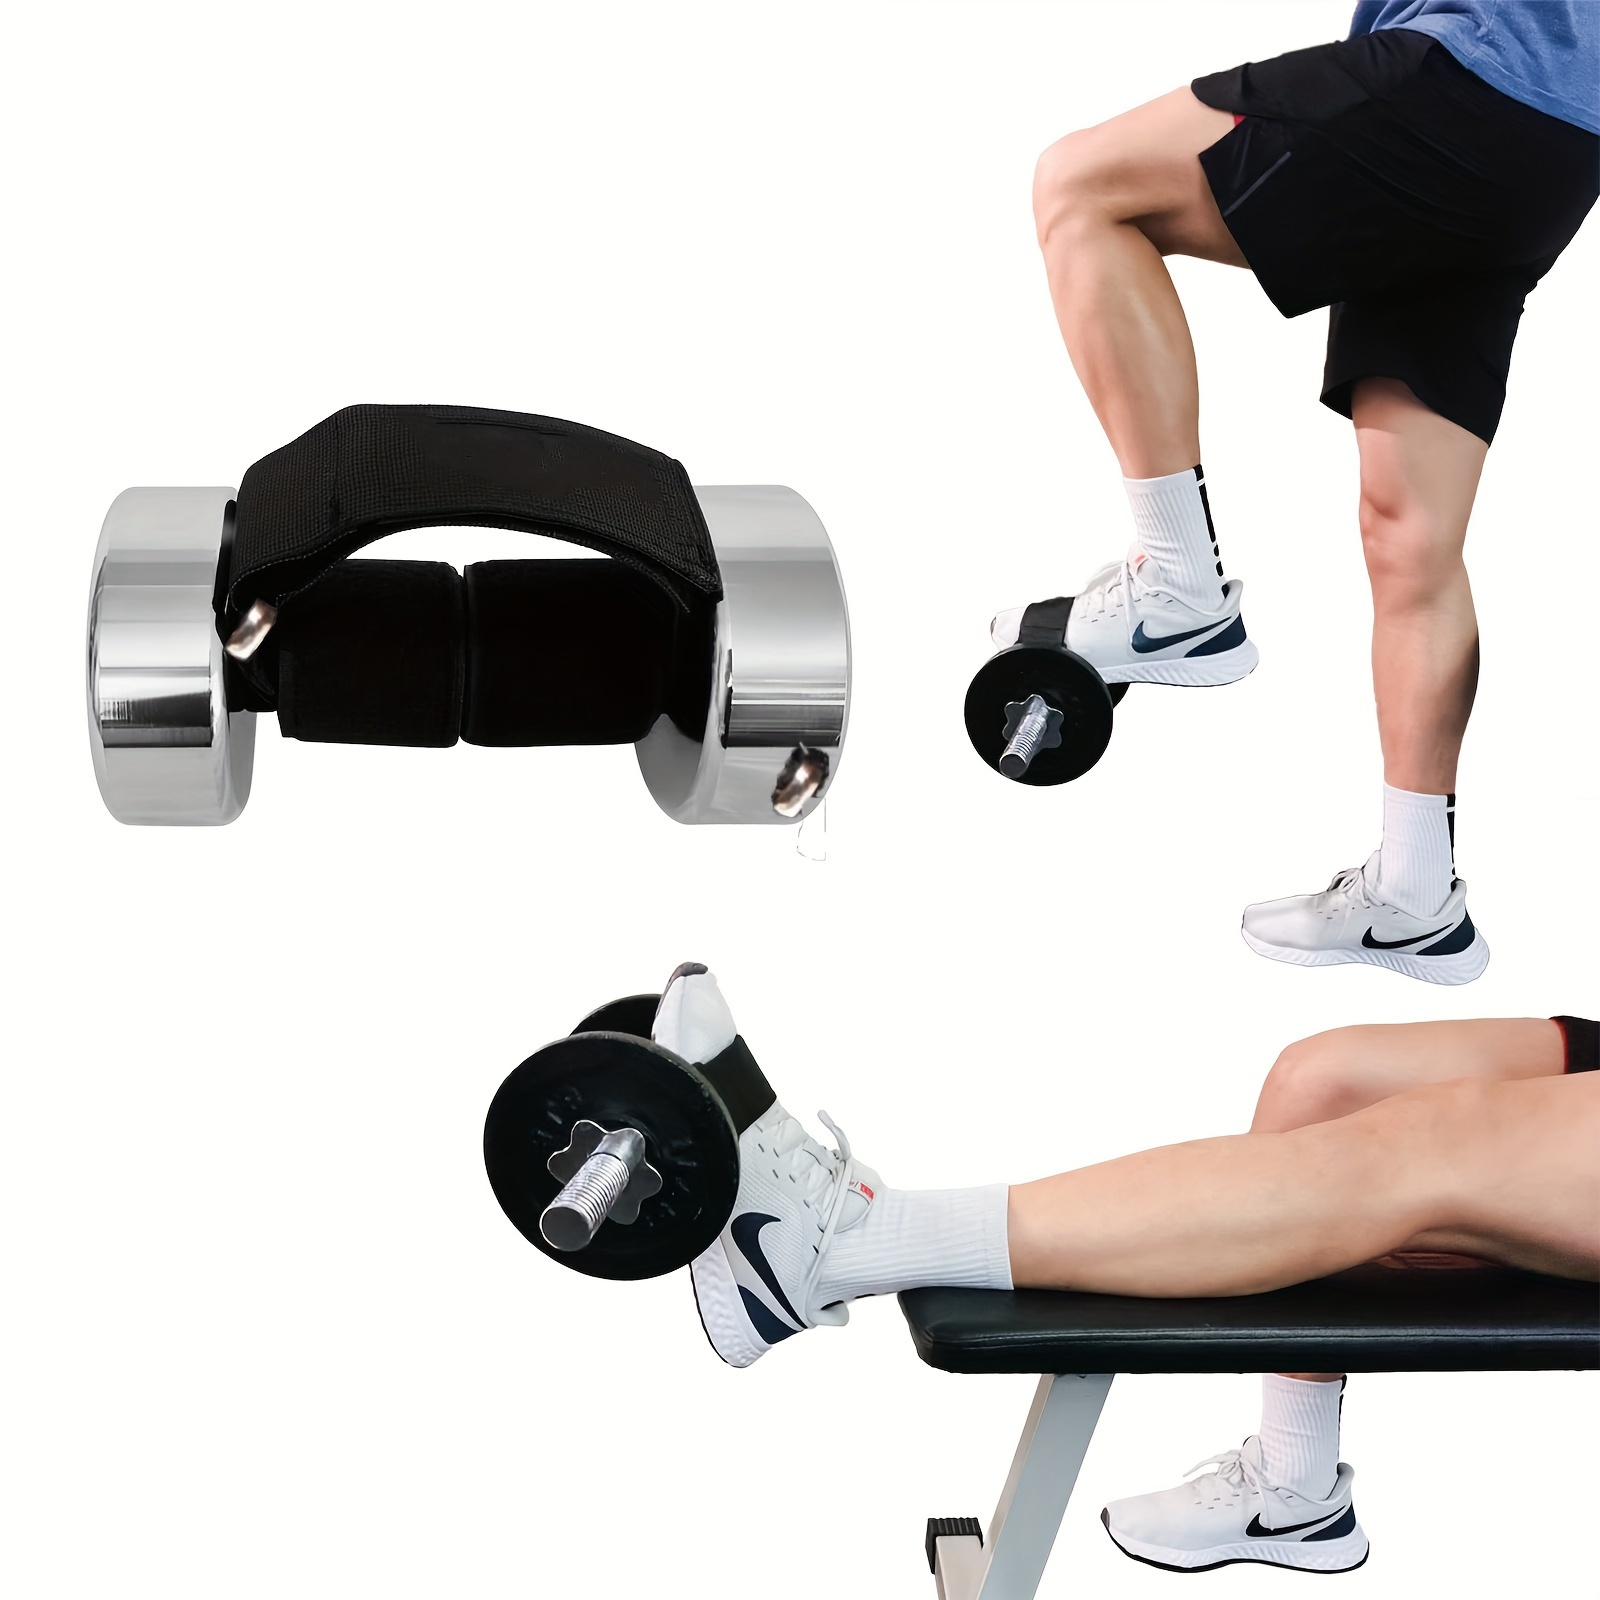 1pc/2pcs Dumbbell Foot Attachment, Tibialis Trainer, Adjustable Ankle  Straps For Weight Lifting & Leg Workouts, Home & Gym Fitness Equipment